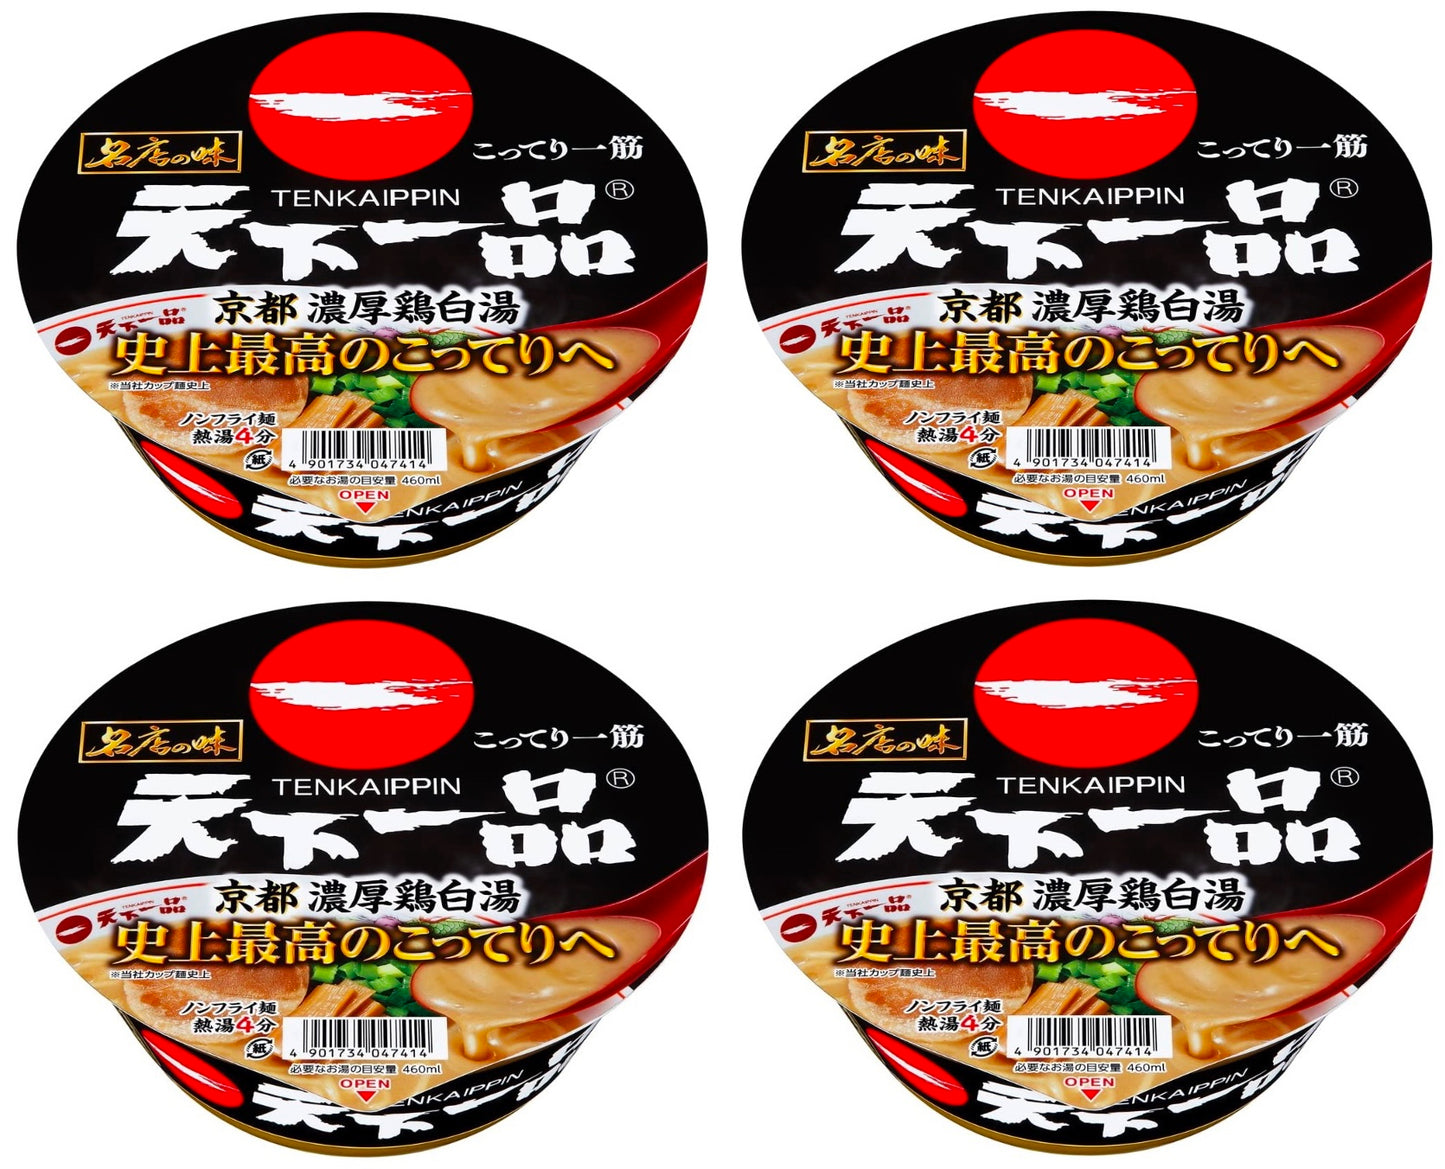 Japanese Ramen Noodles TENKAIPPIN Chicken Broth Instant Food Soup Cup SANYO 138g